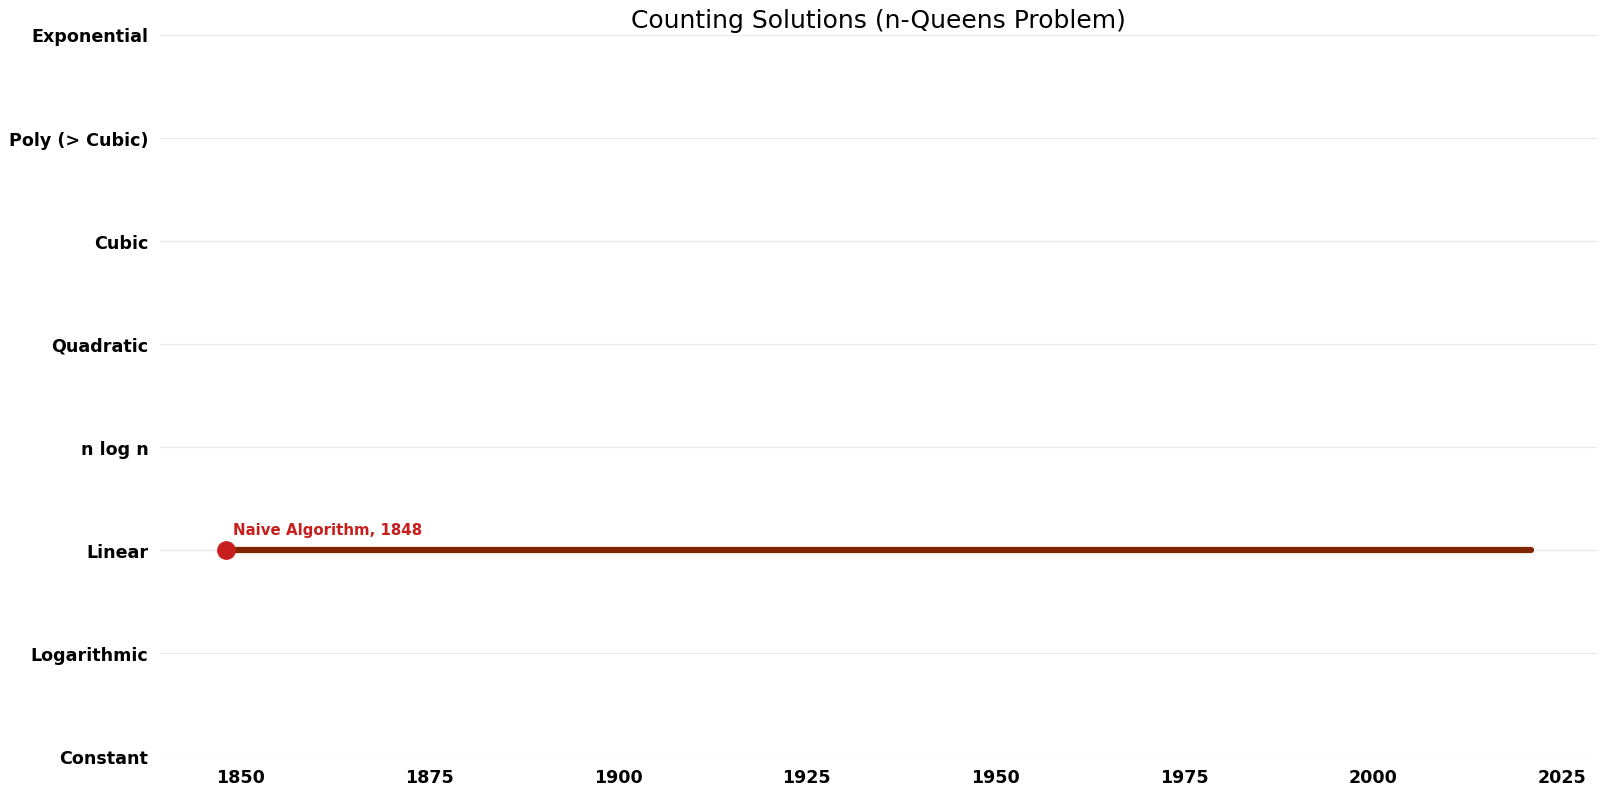 N-Queens Problem - Counting Solutions - Space.png